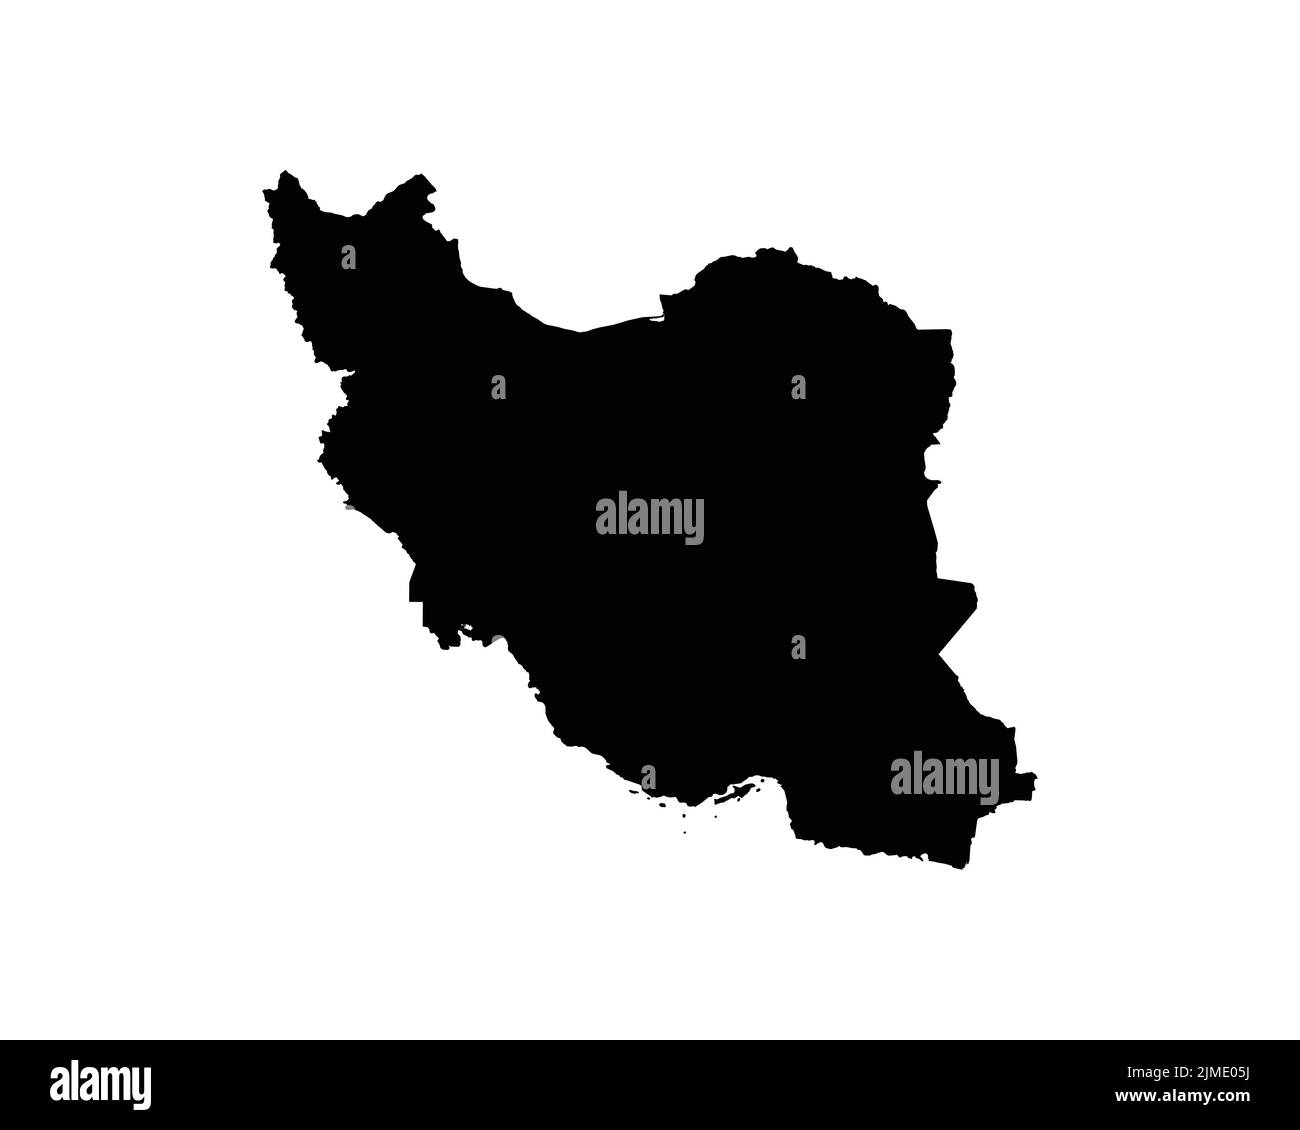 Iran Map. Iranian Country Map. Black and White Persia Persian National Nation Outline Geography Border Boundary Shape Territory Vector Illustration EP Stock Vector